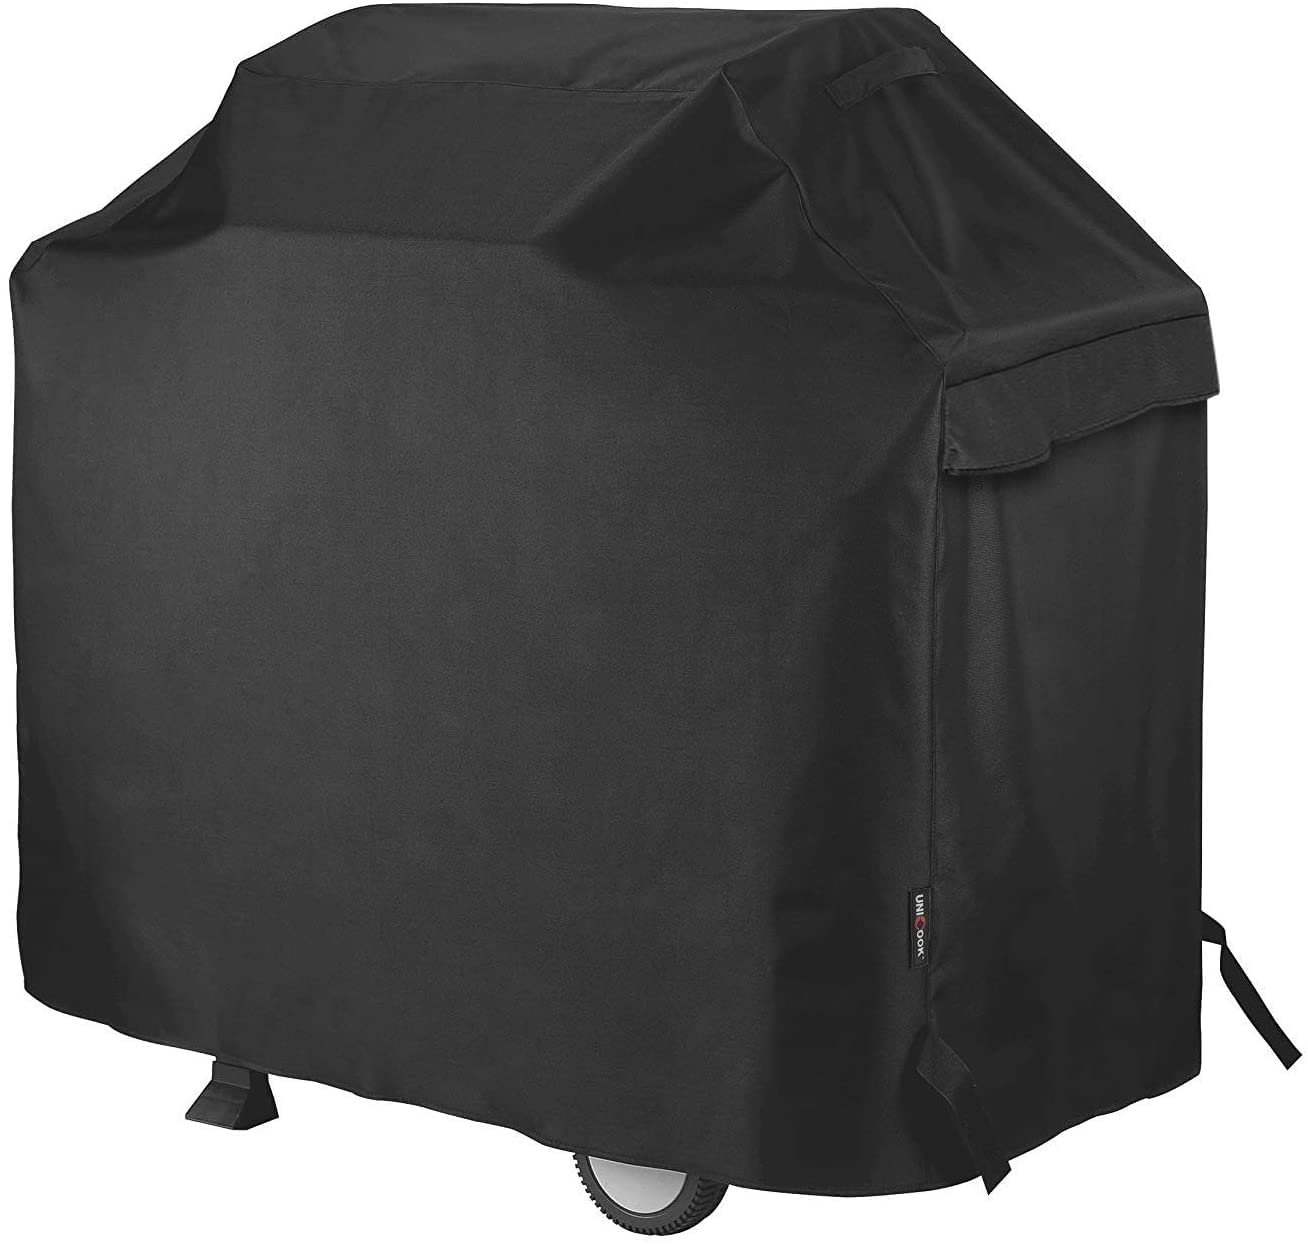 Unicook grill cover 50 Inch for Outdoor grill, Heavy Duty Waterproof Barbecue gas grill cover, Small 2-3 Burner BBQ cover, Fade 